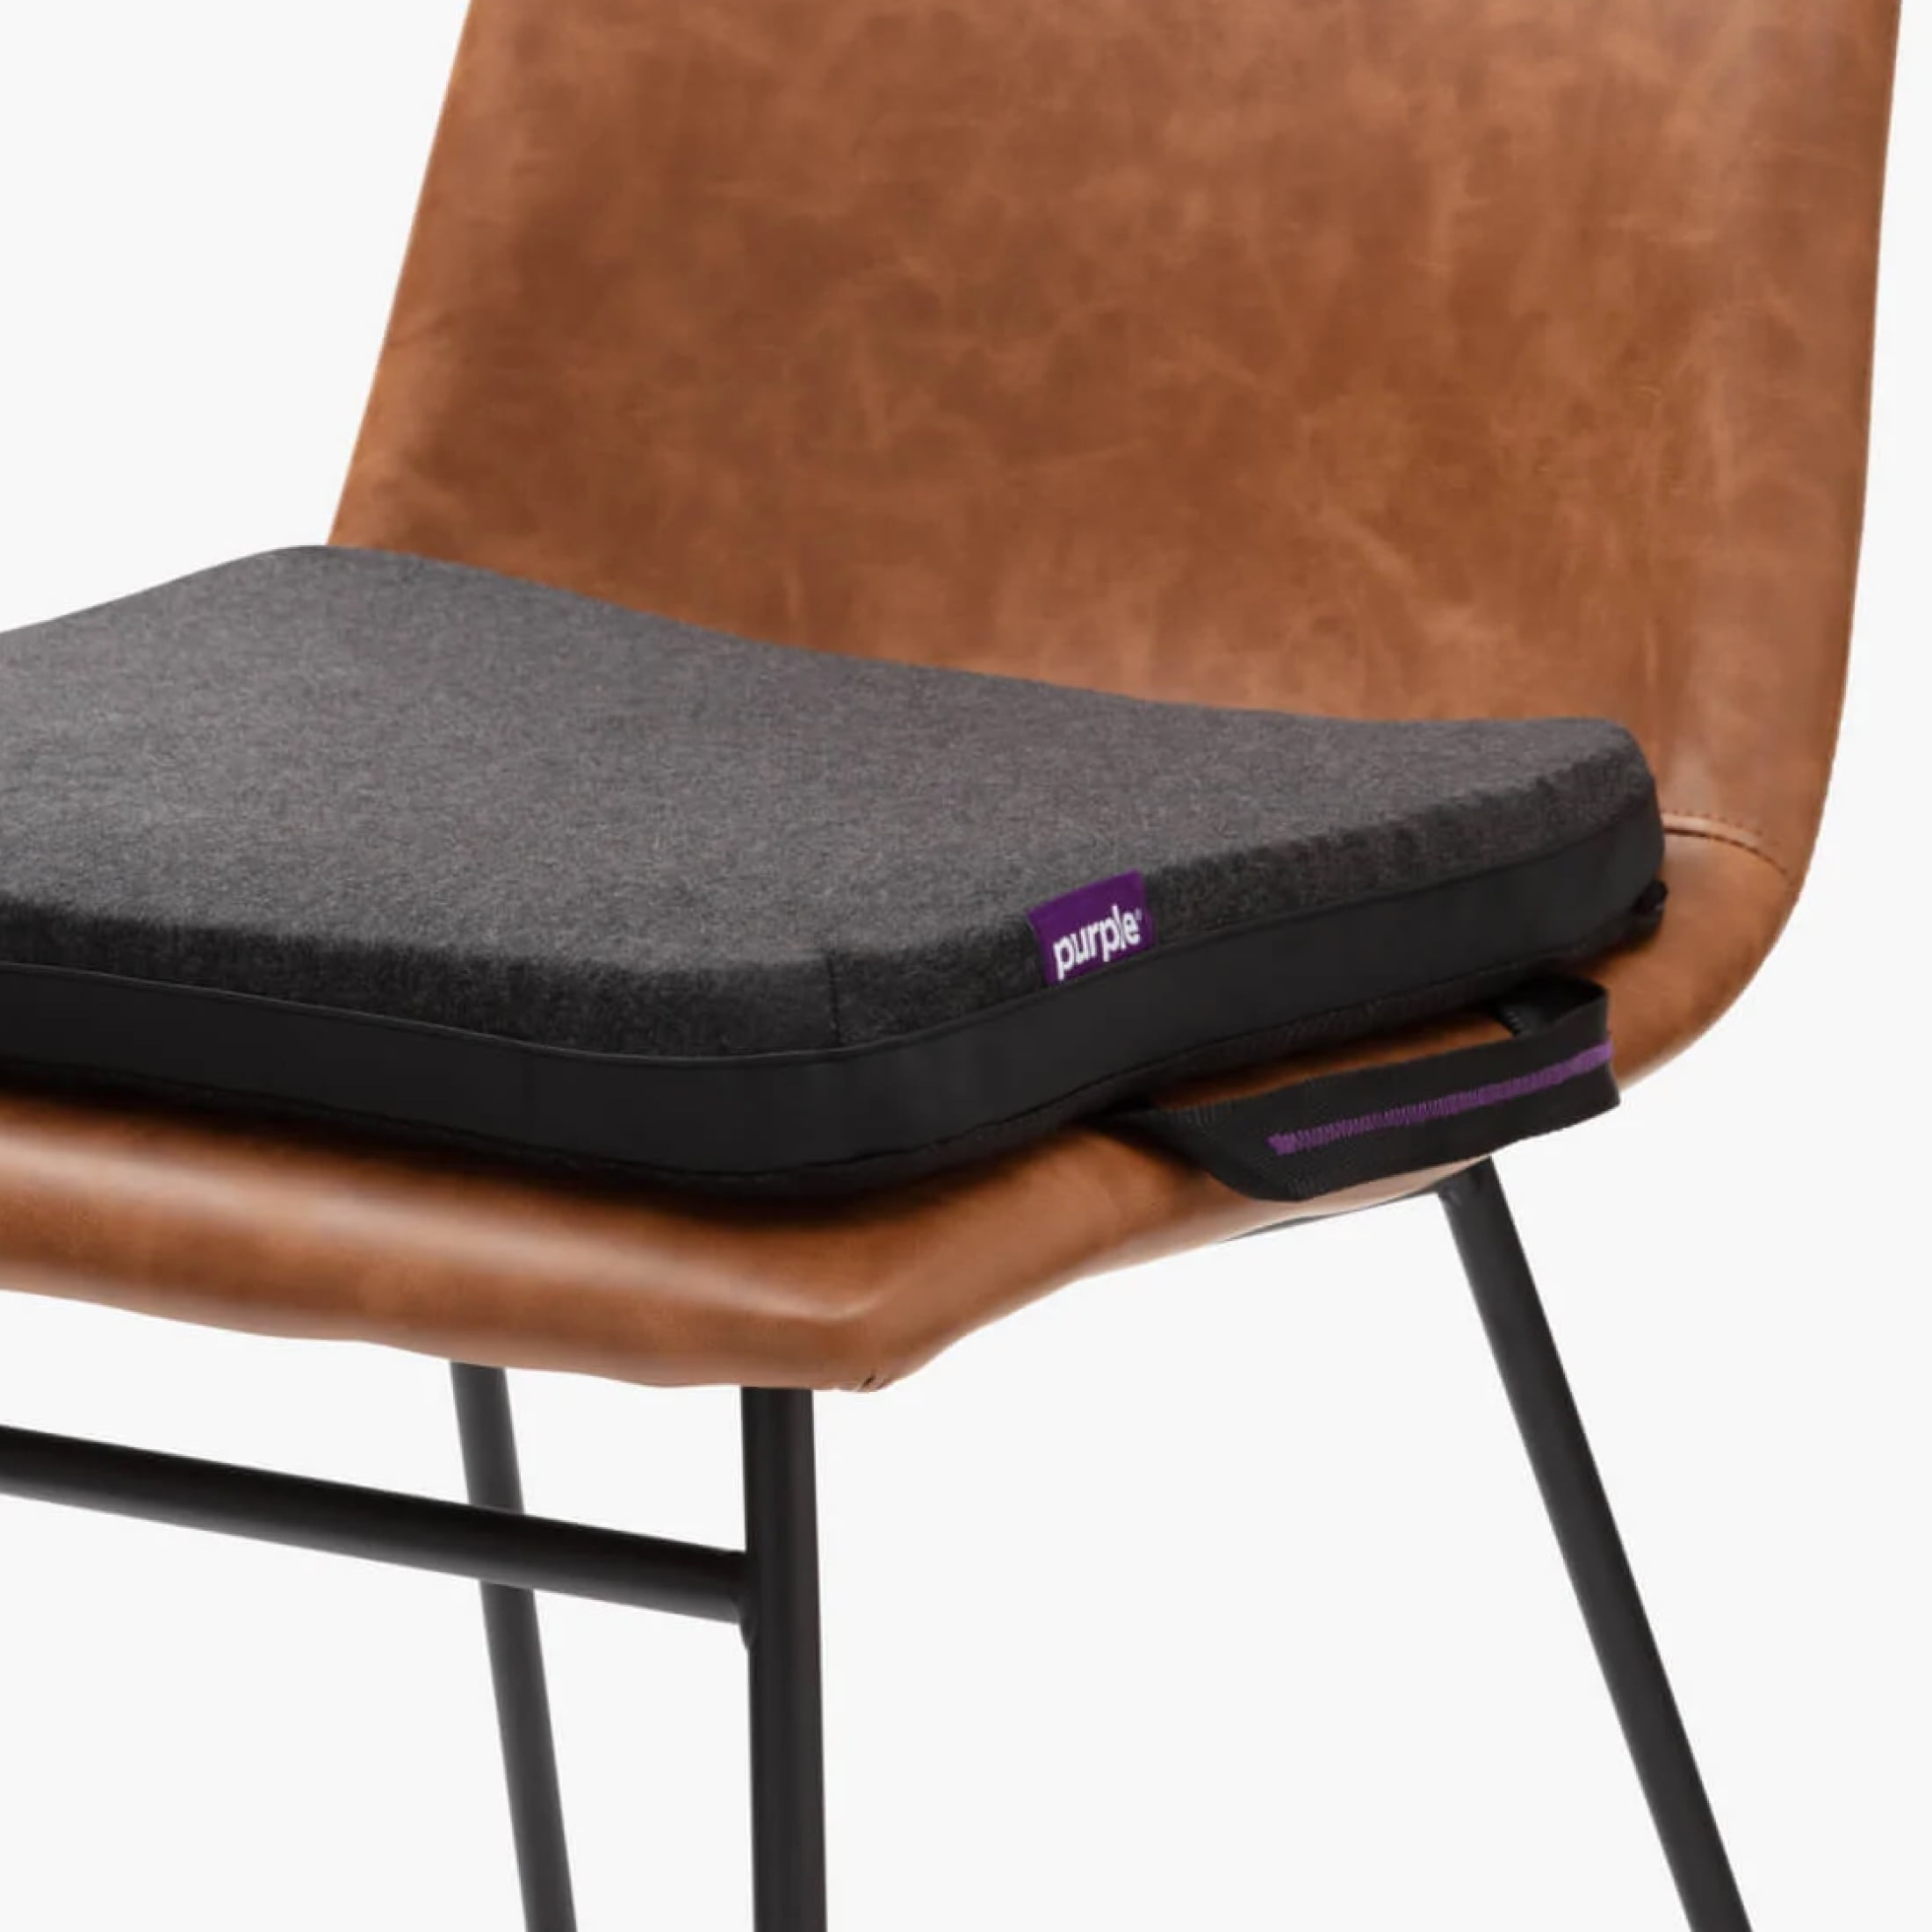 Purple Foldaway Seat Cushion, Pressure Reducing Grid Designed for Ultimate  Comfort, Designed for Bleachers and Events, Made in The USA